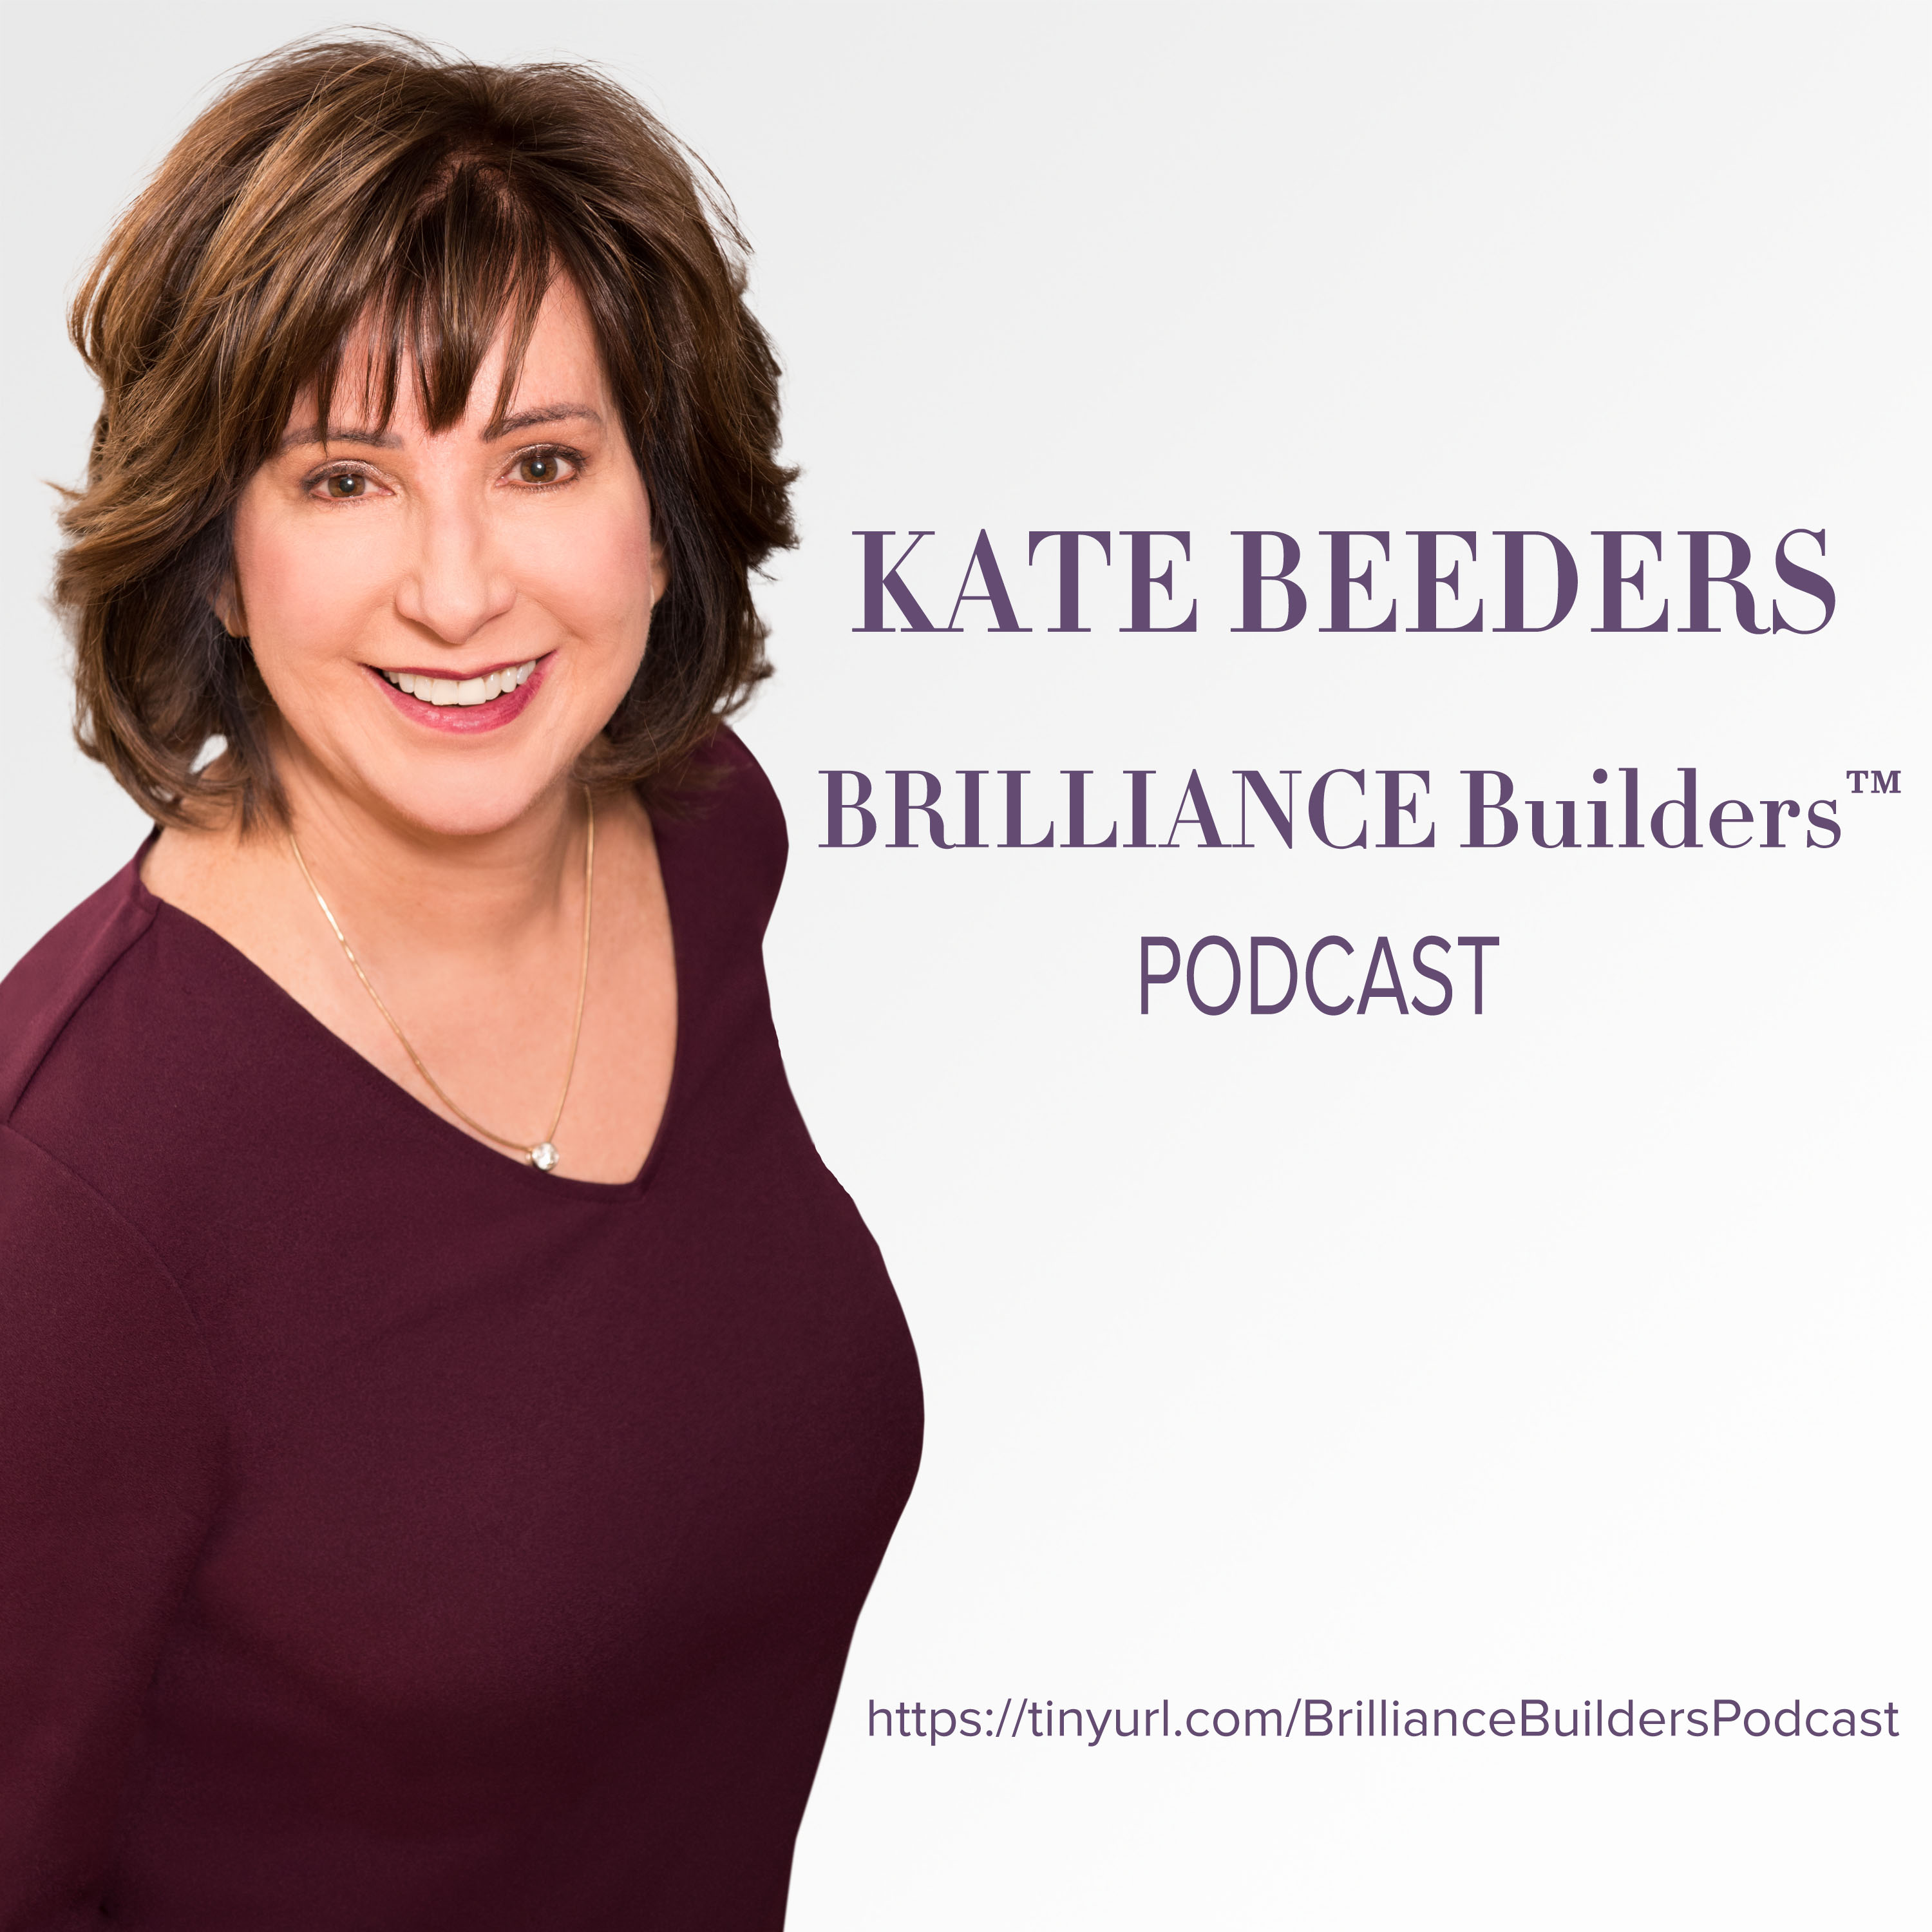 BRILLIANCE Builders™ Live by Kate Beeders